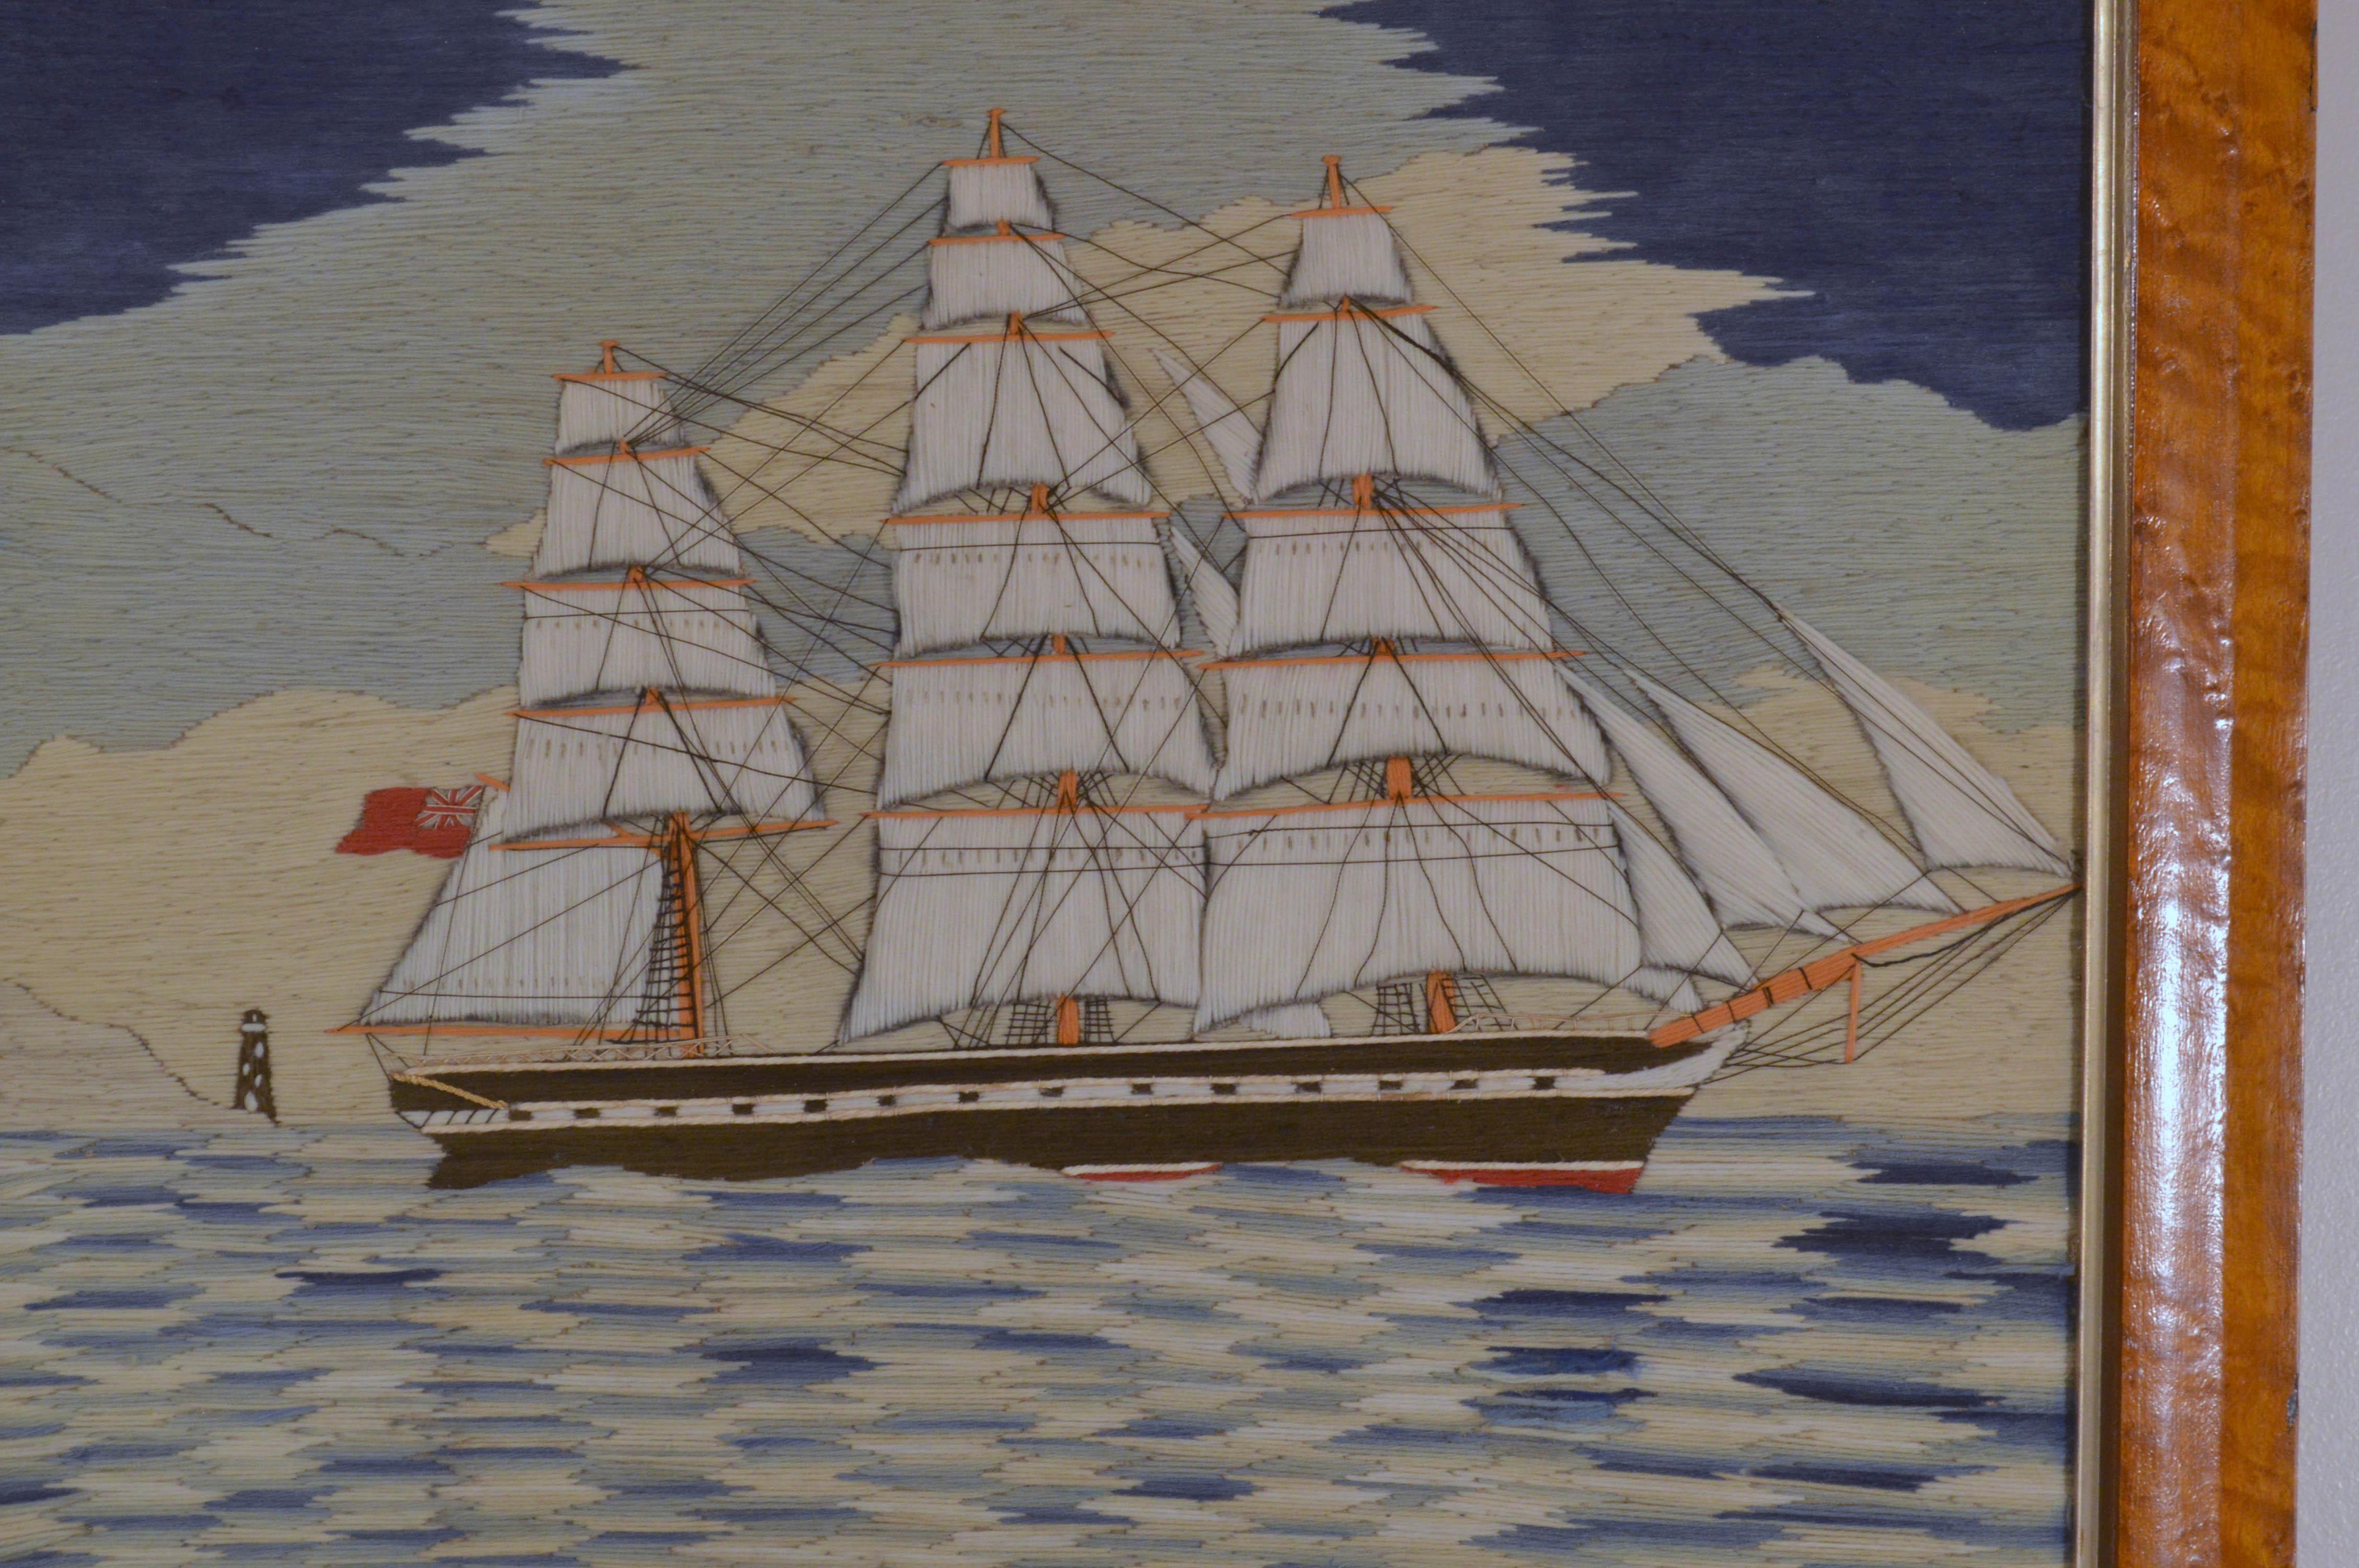 British Sailor's woolwork of a merchant navy three masted ship,
circa 1875
(Ref: NY9344-NCRR)

The sailor's wool depicts a starboard view of a three-masted merchant ship under full sail going out to sea, a promontory with a black lighthouse is